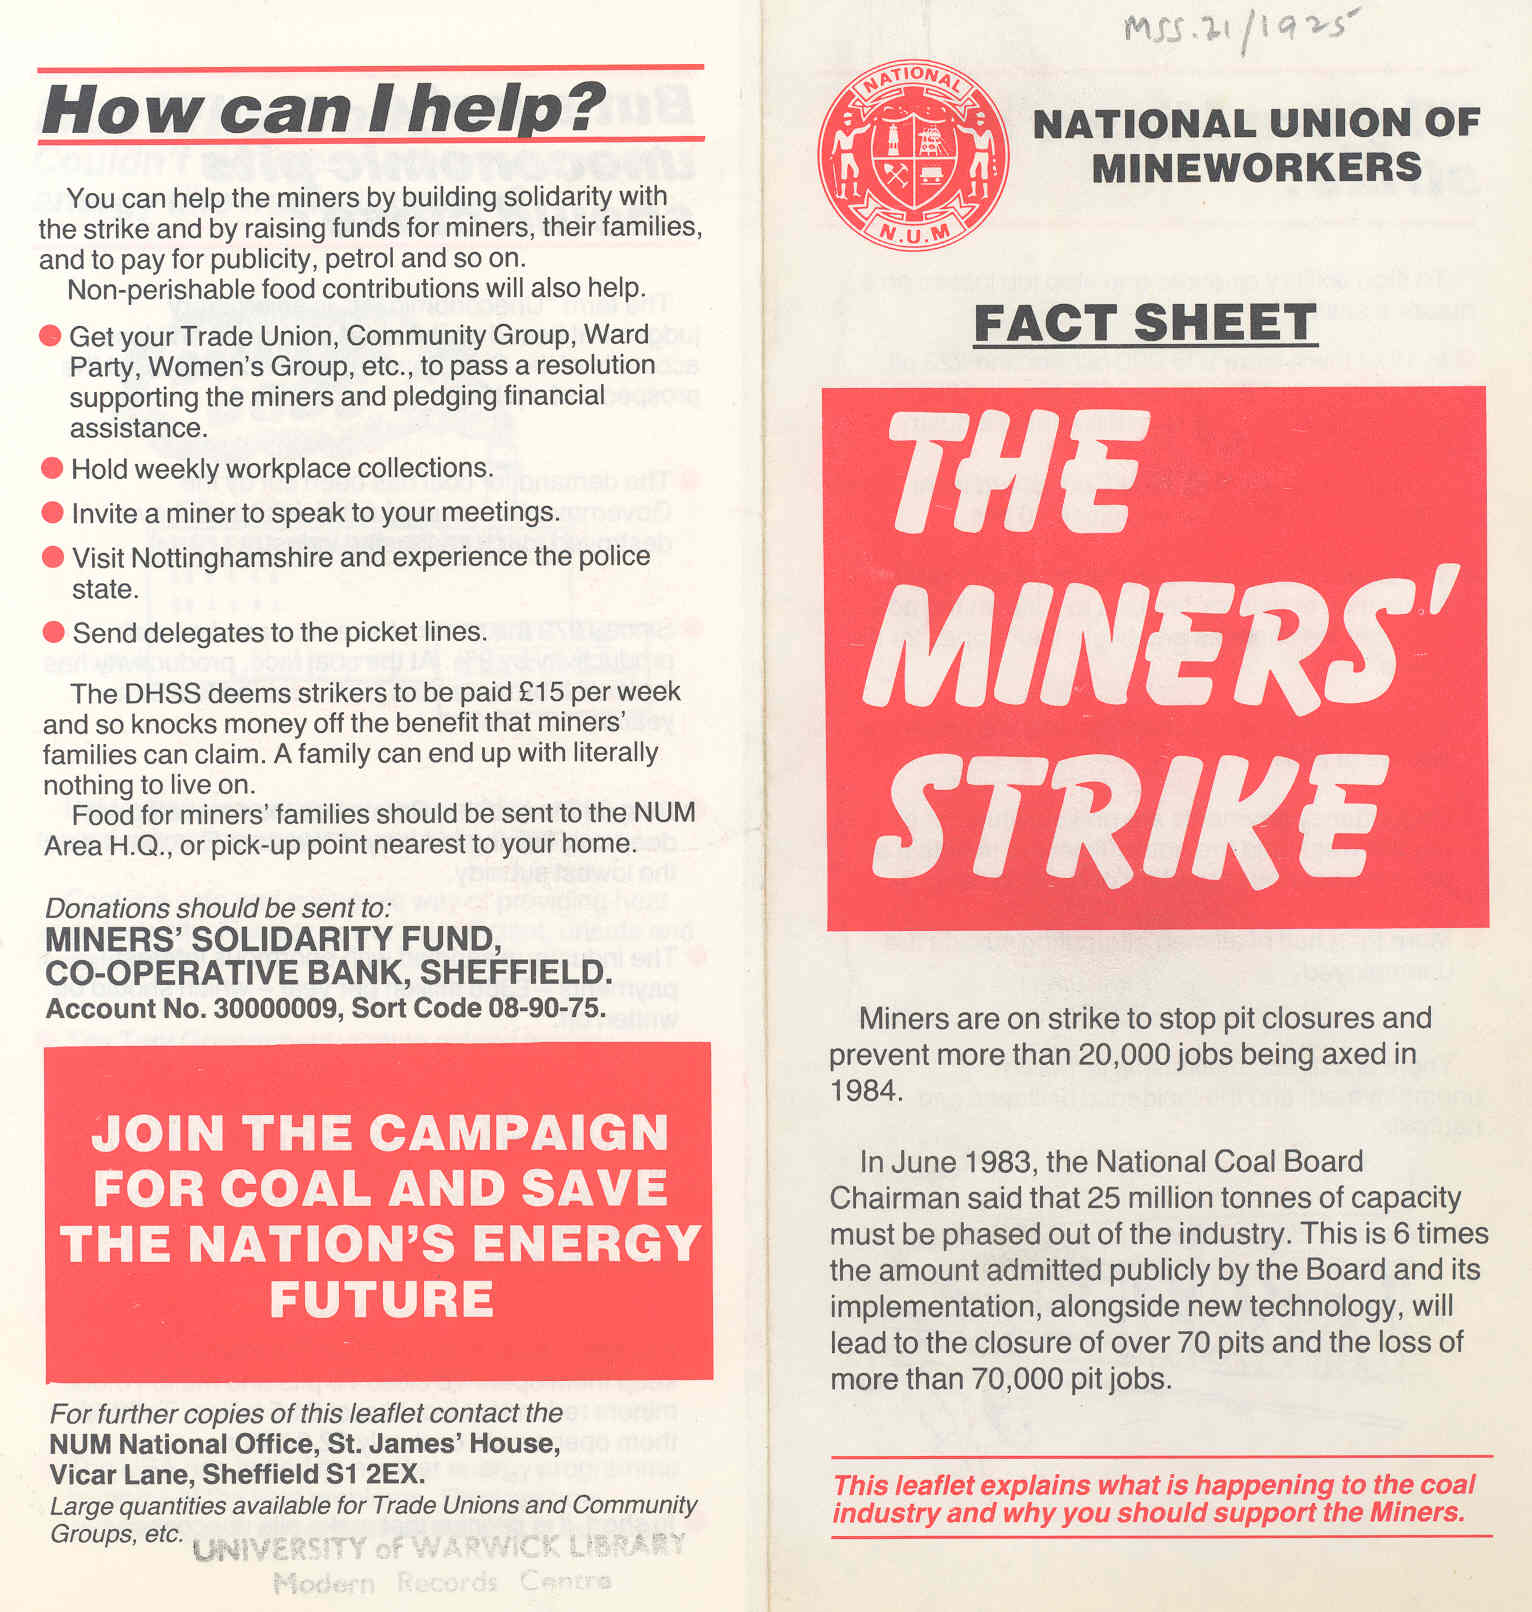 National Union of Mineworkers fact sheet on the strike